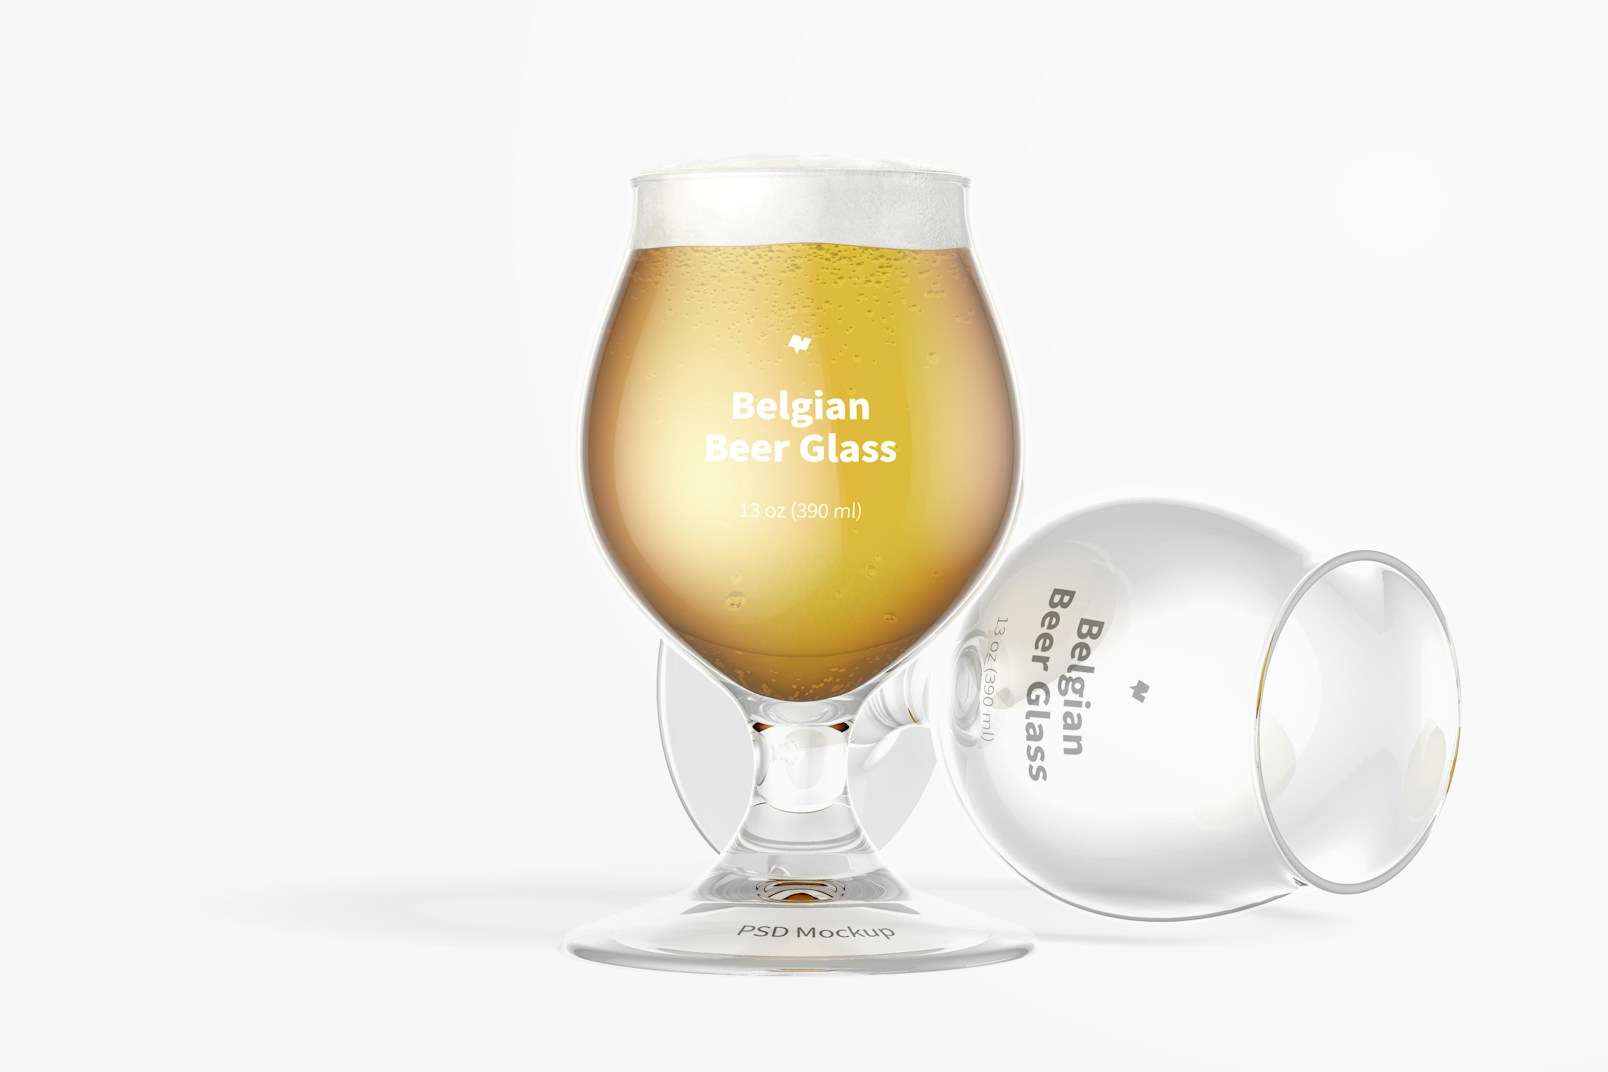 13 oz Belgian Beer Glass Mockup, Standing and Dropped